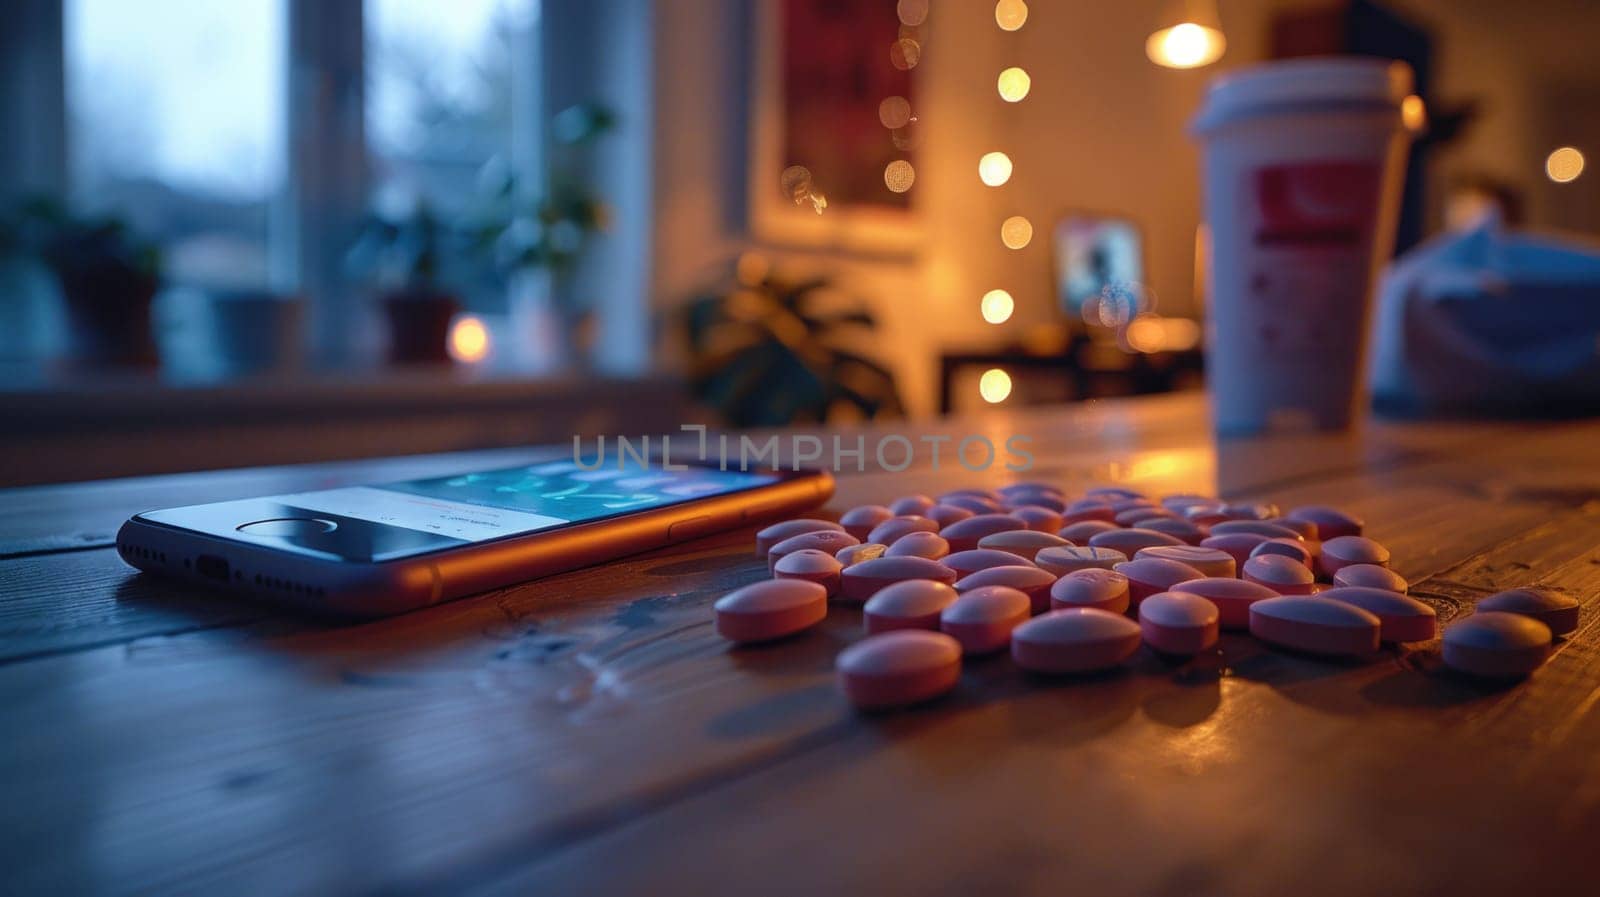 A professional photograph of prescription pills scattered on a table next to a cell phone.